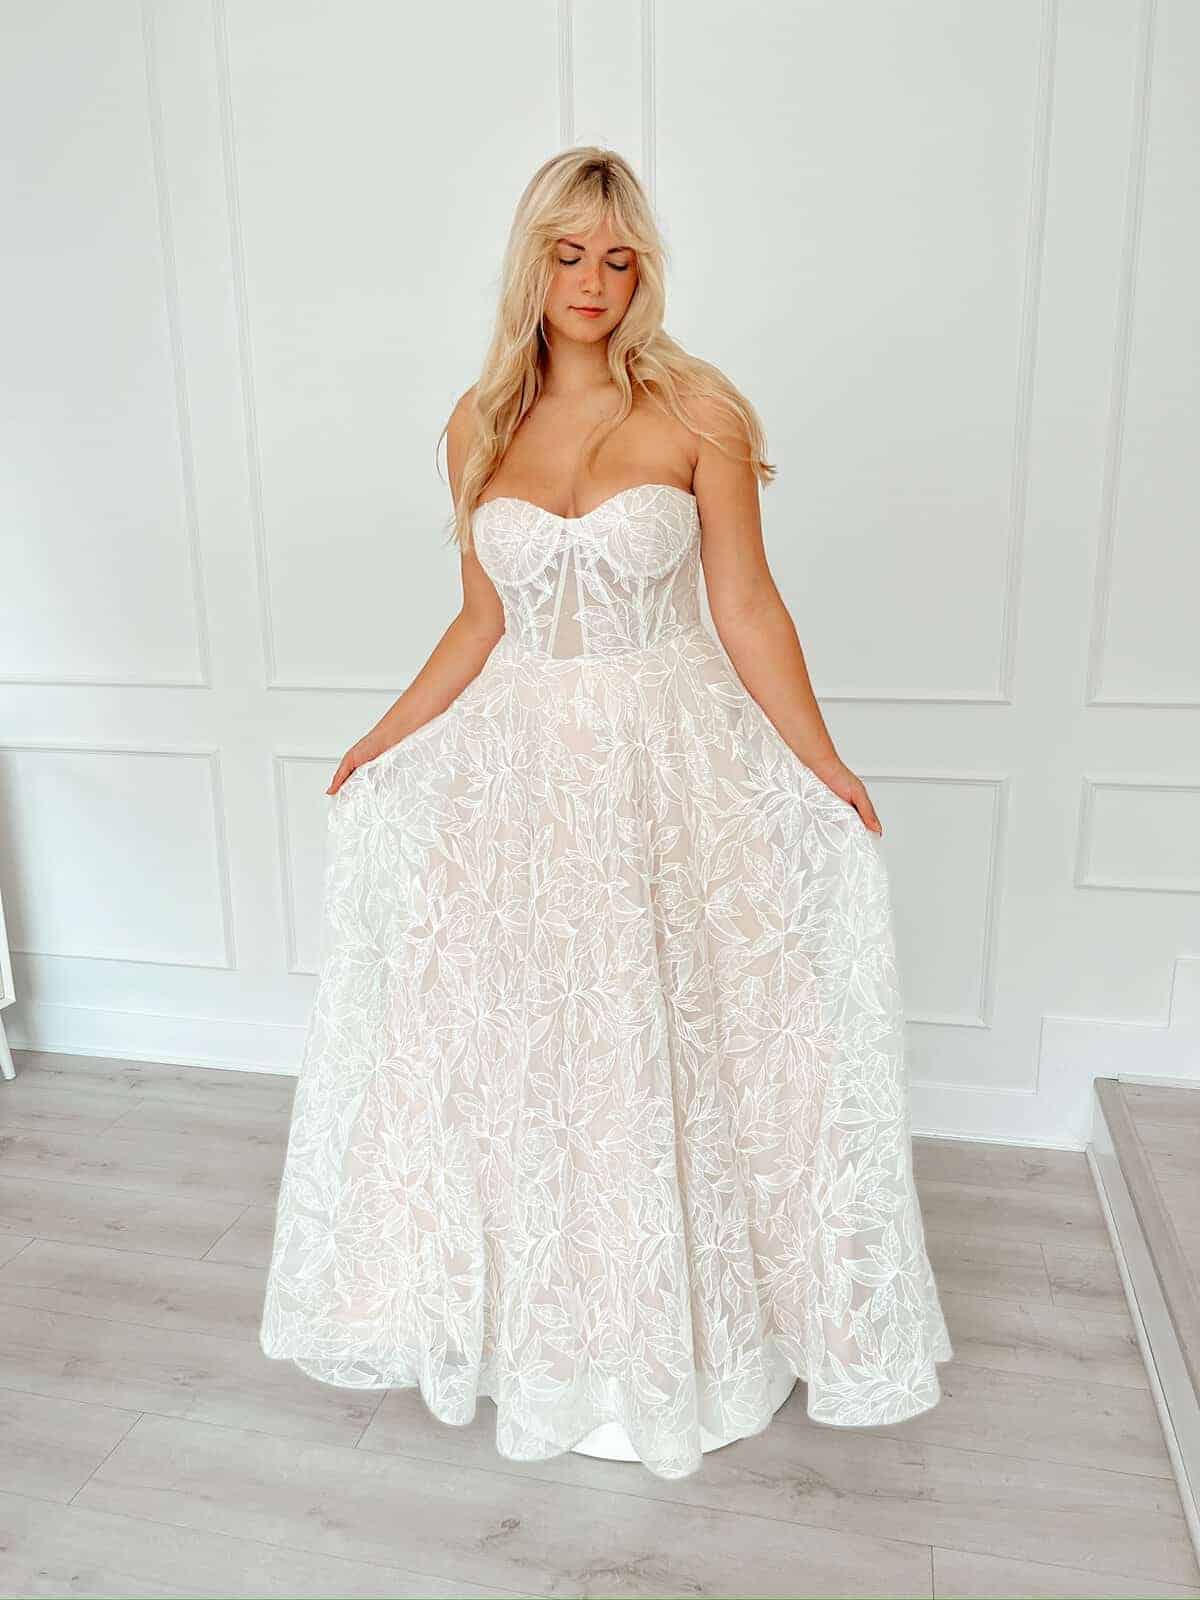 how to find the right plus-size wedding dress